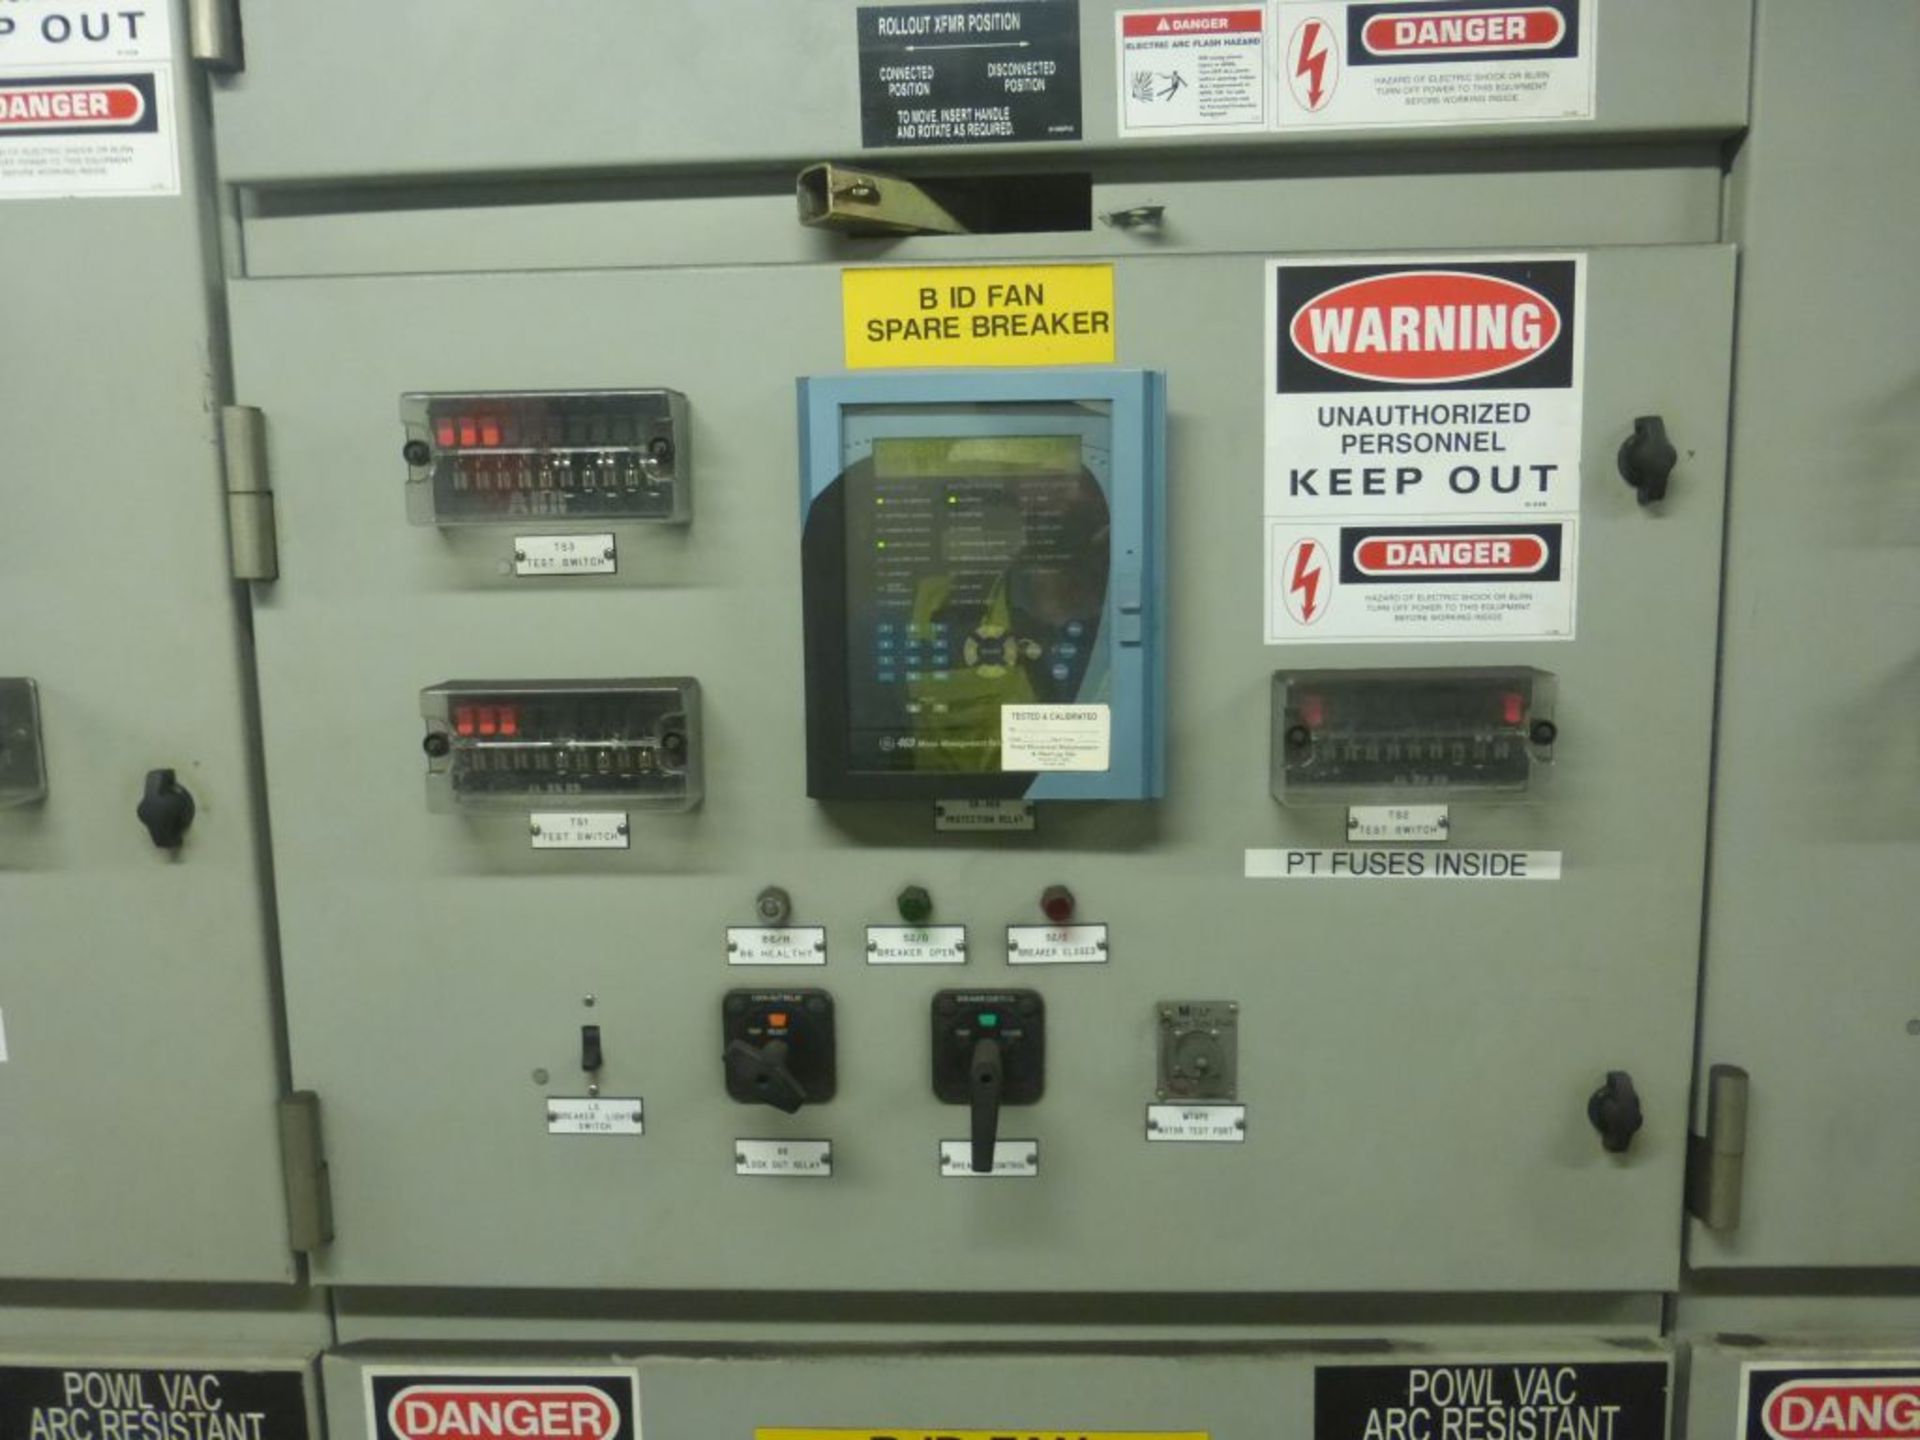 Powell 3000A Arc Resistant MV Metal Clad Switchgear - Image 15 of 68